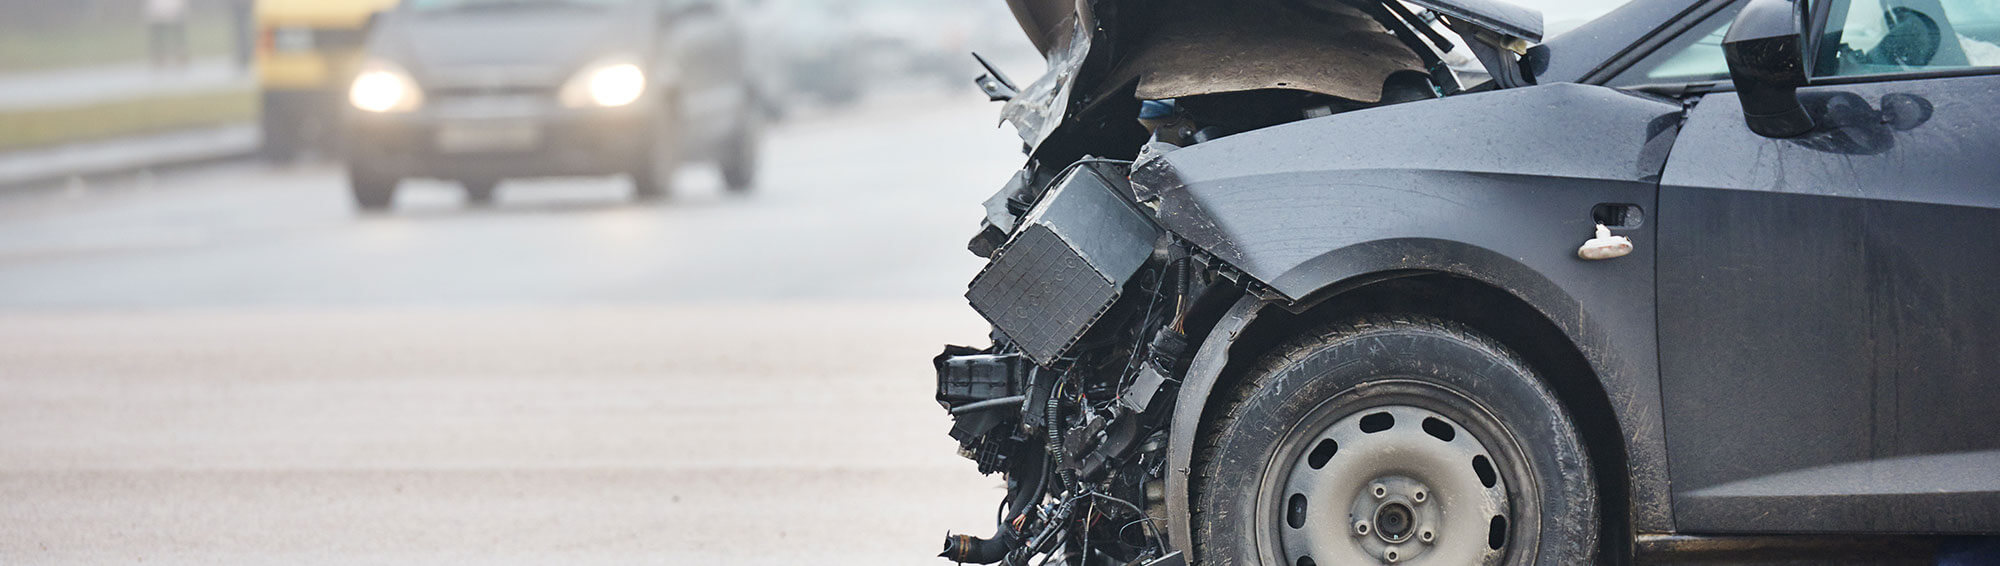 Don’t Forget About These Important Post-Auto Accident Steps